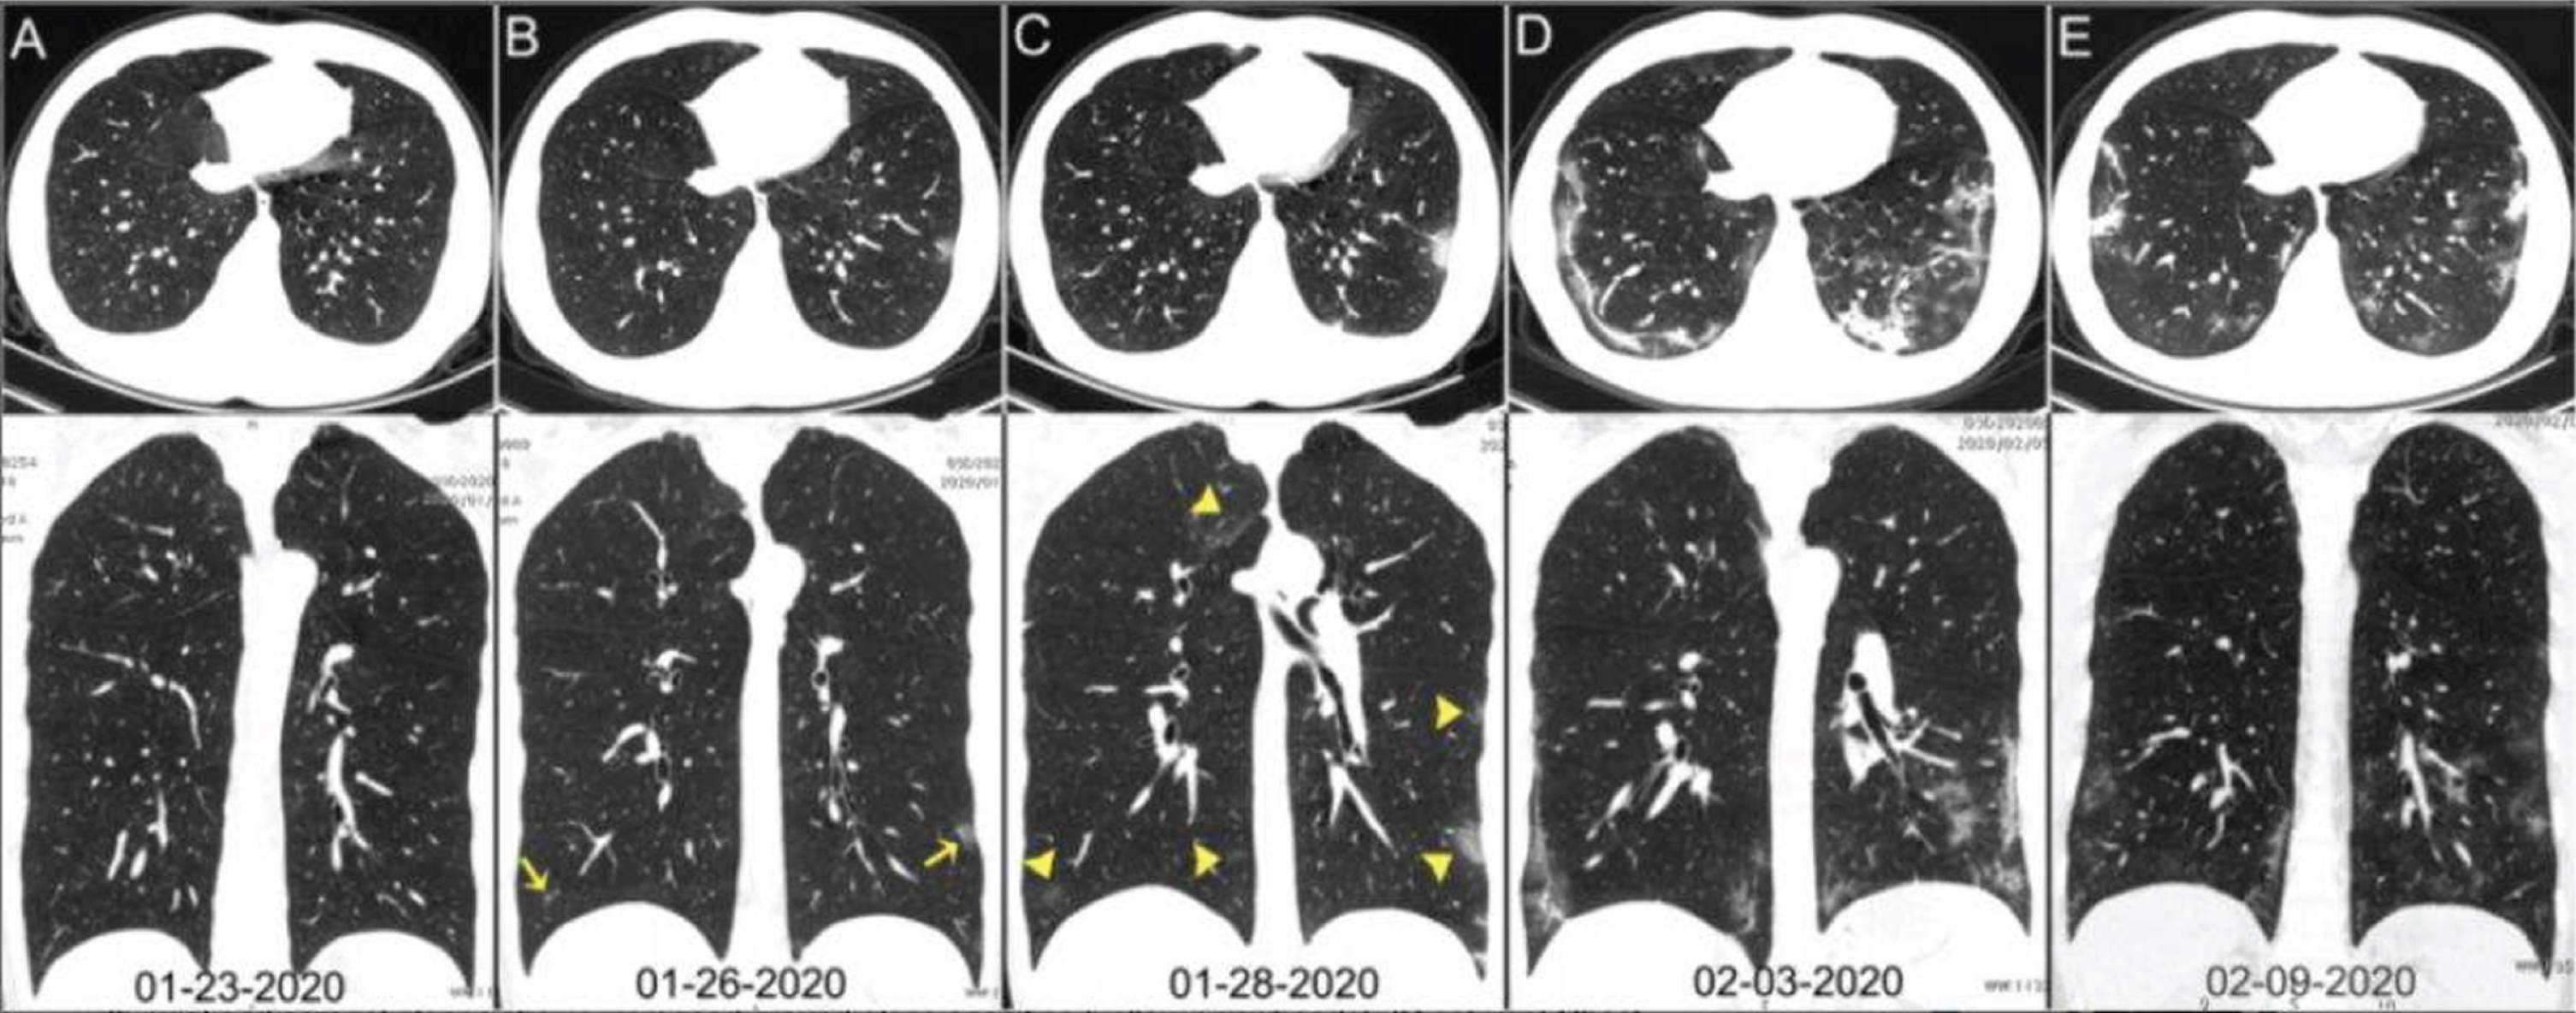 Chest CT images of infected person with coronavirus.Source: https://www.itnonline.com/sites/itnonline/files/styles/content-large.